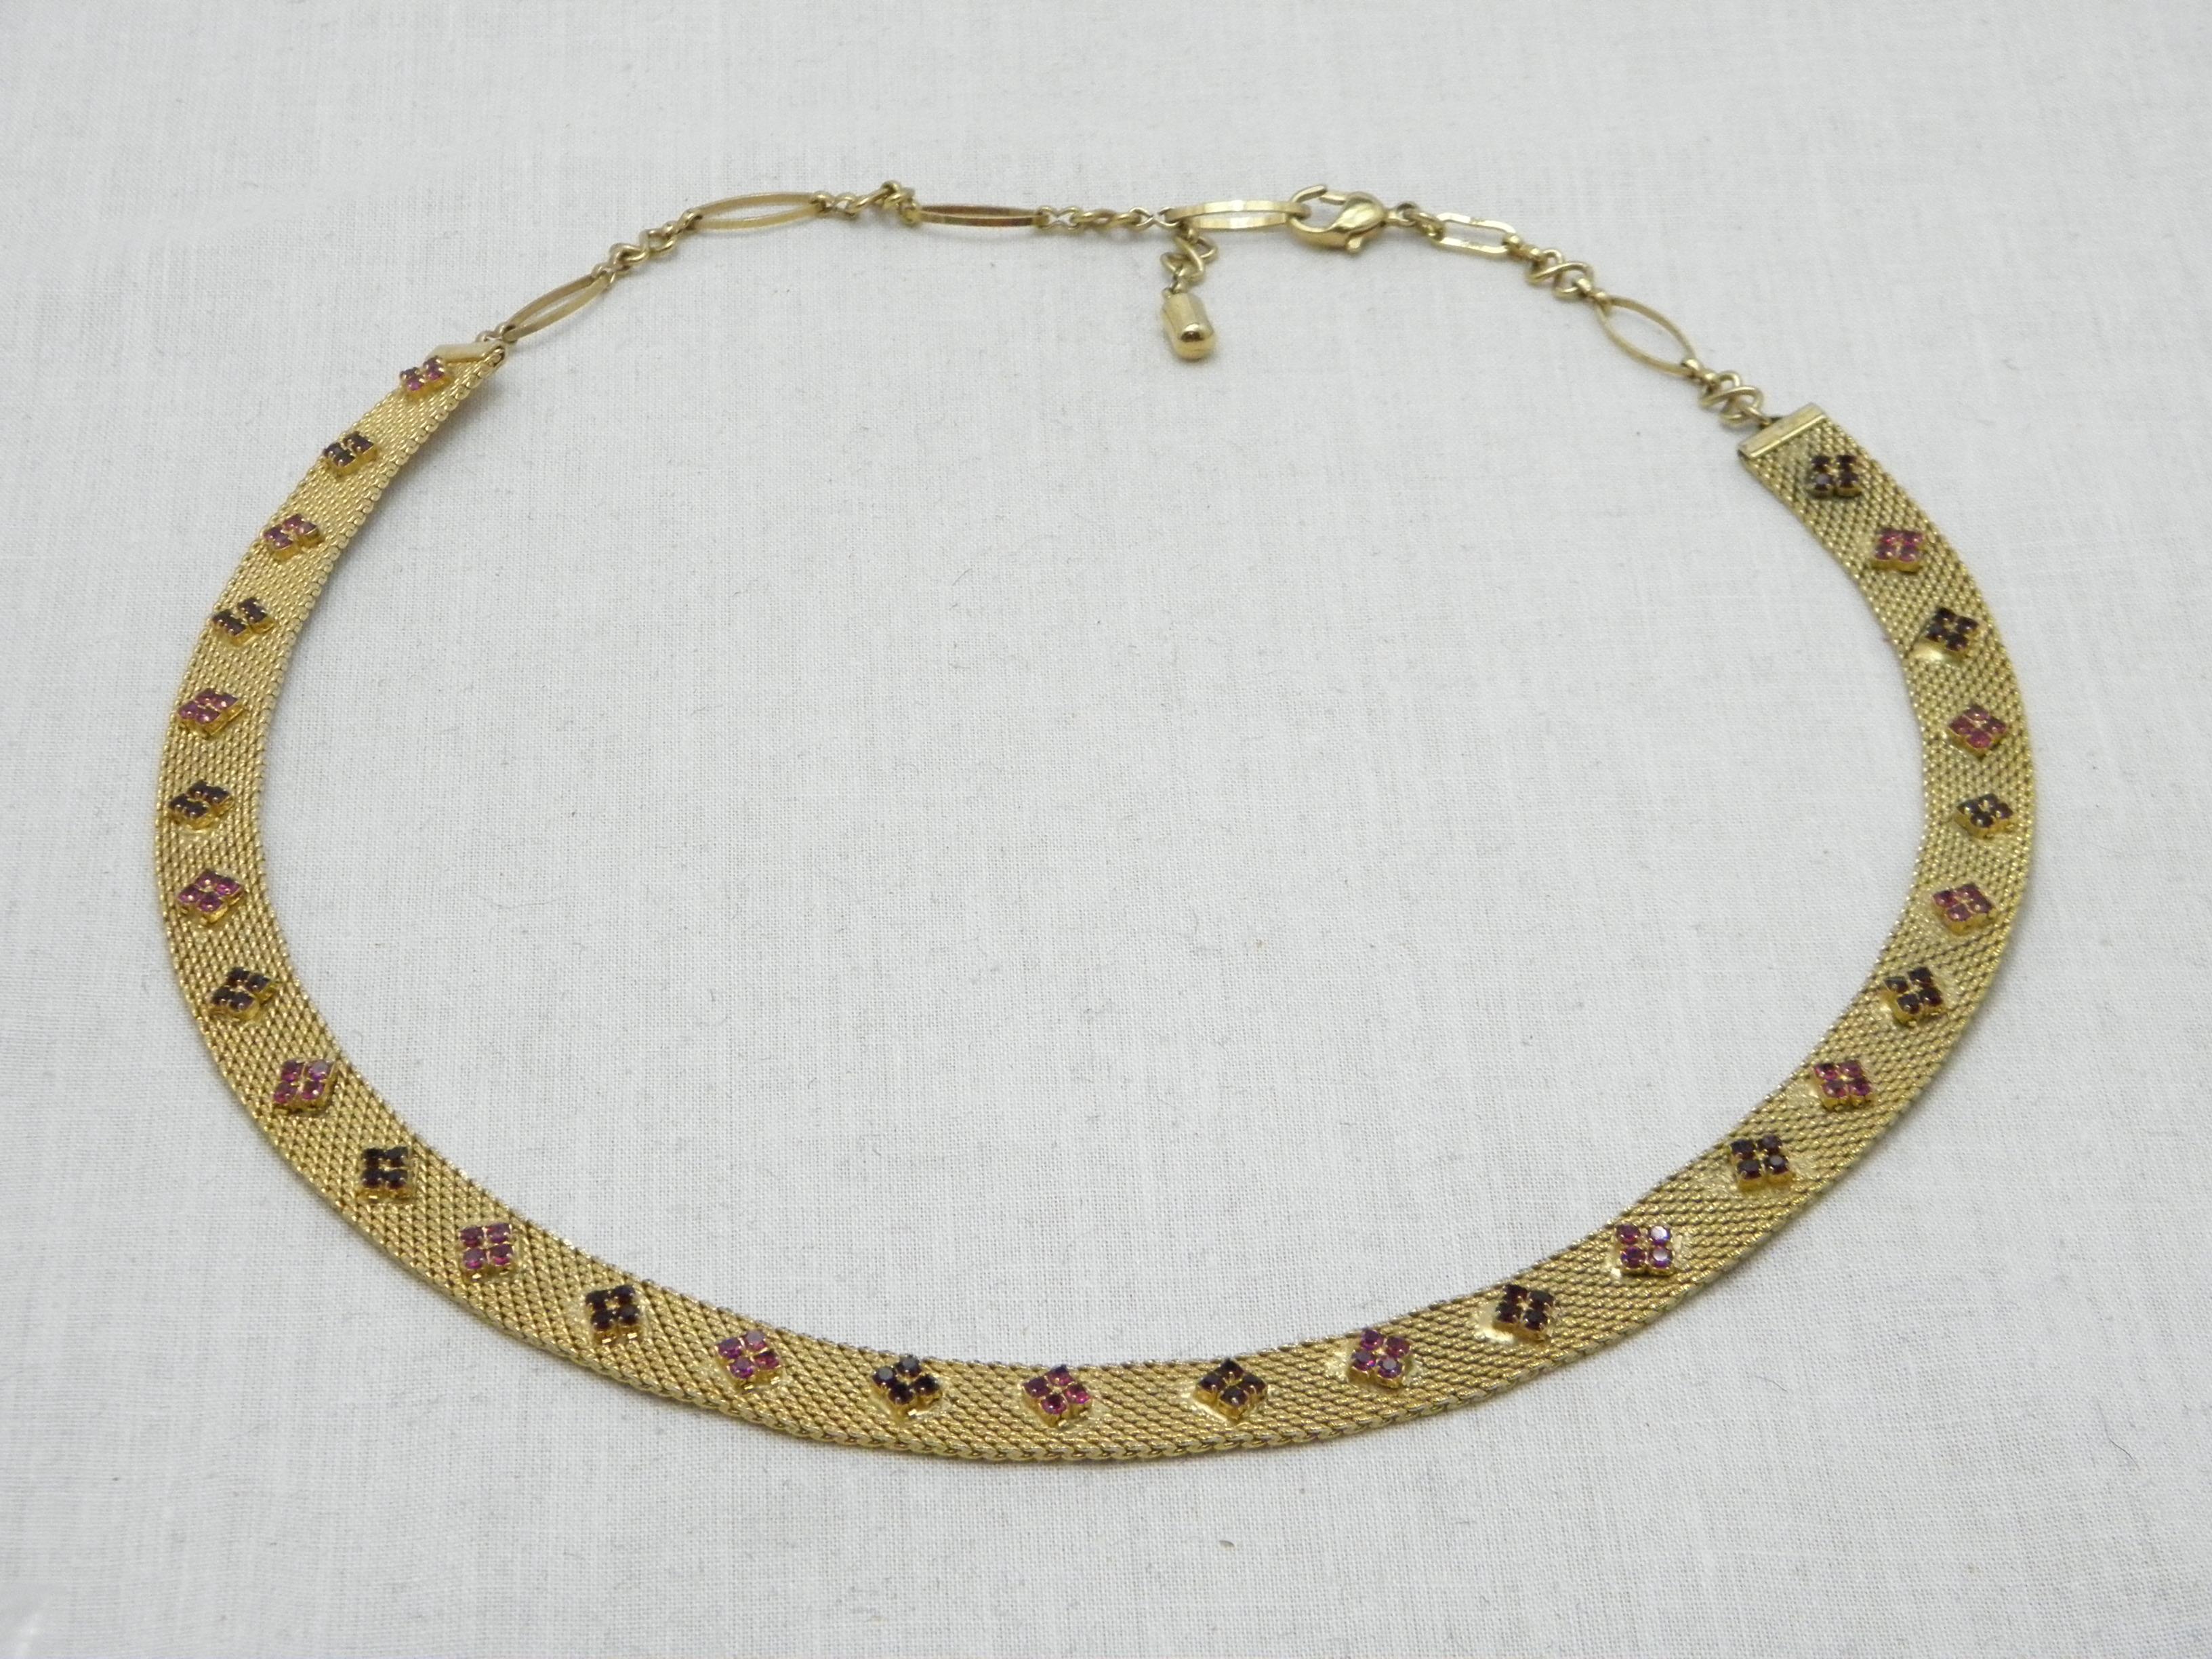 Antique 9ct Gold 'Rolled' Cleopatra Garnet and Ruby Paste Necklace Choker 375 In Good Condition For Sale In Camelford, GB